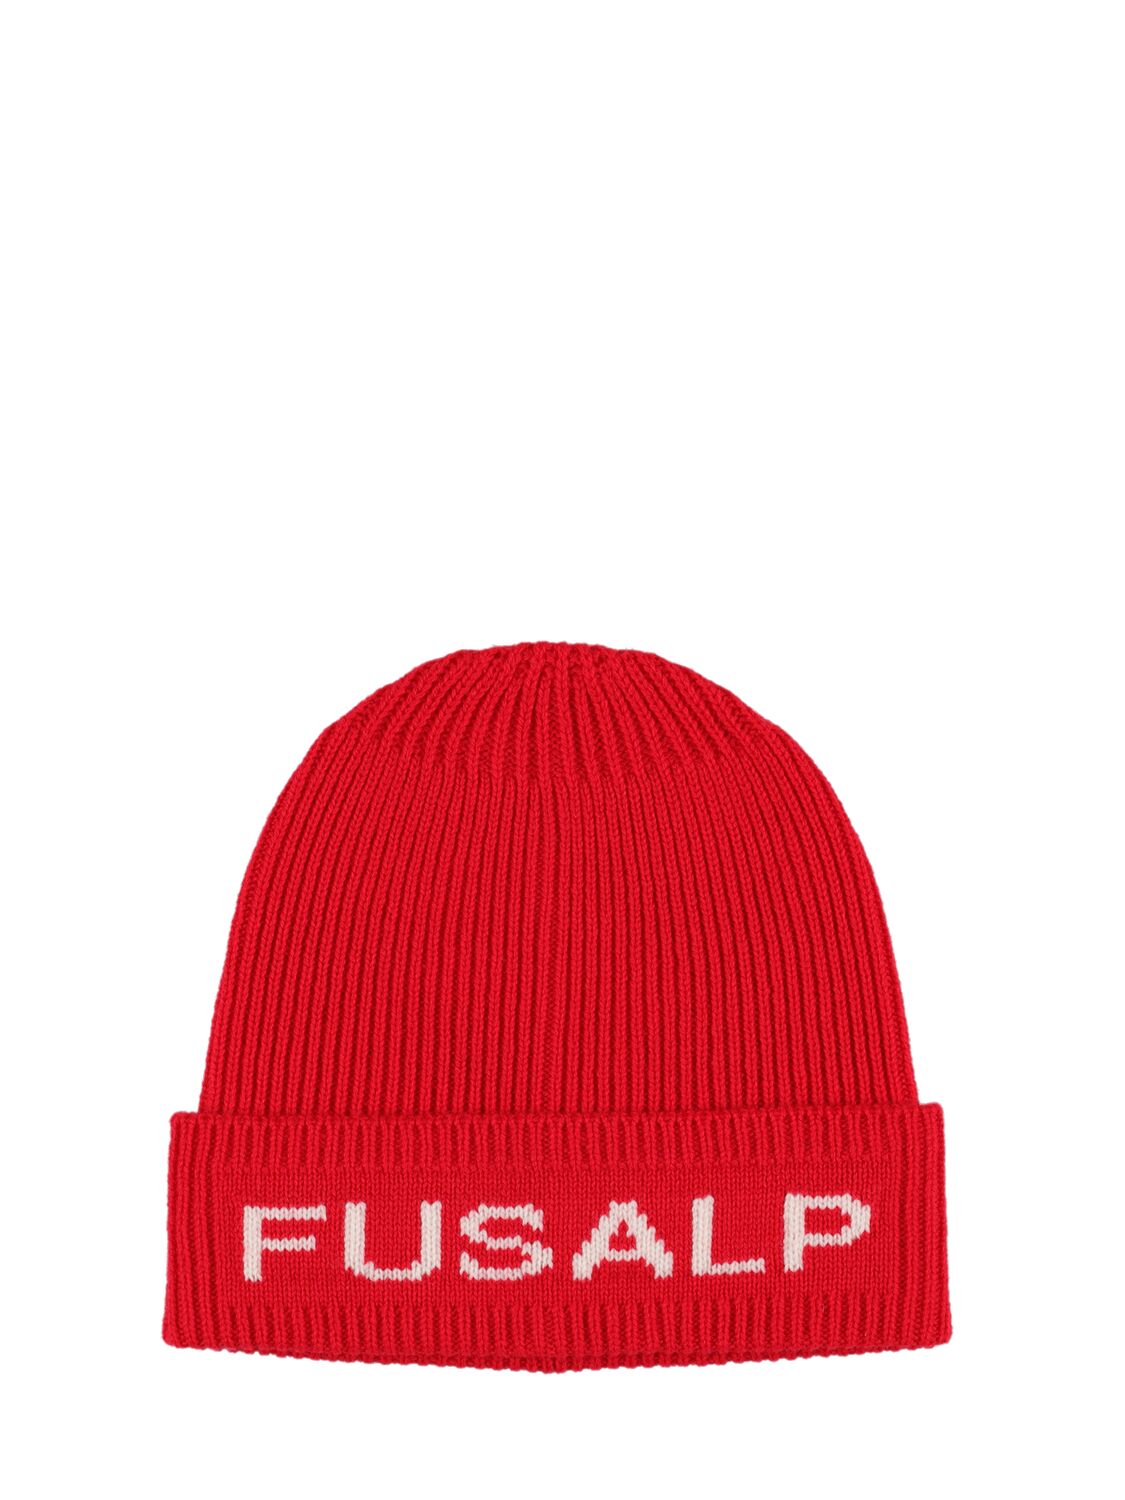 Fully Wool & Cashmere Beanie